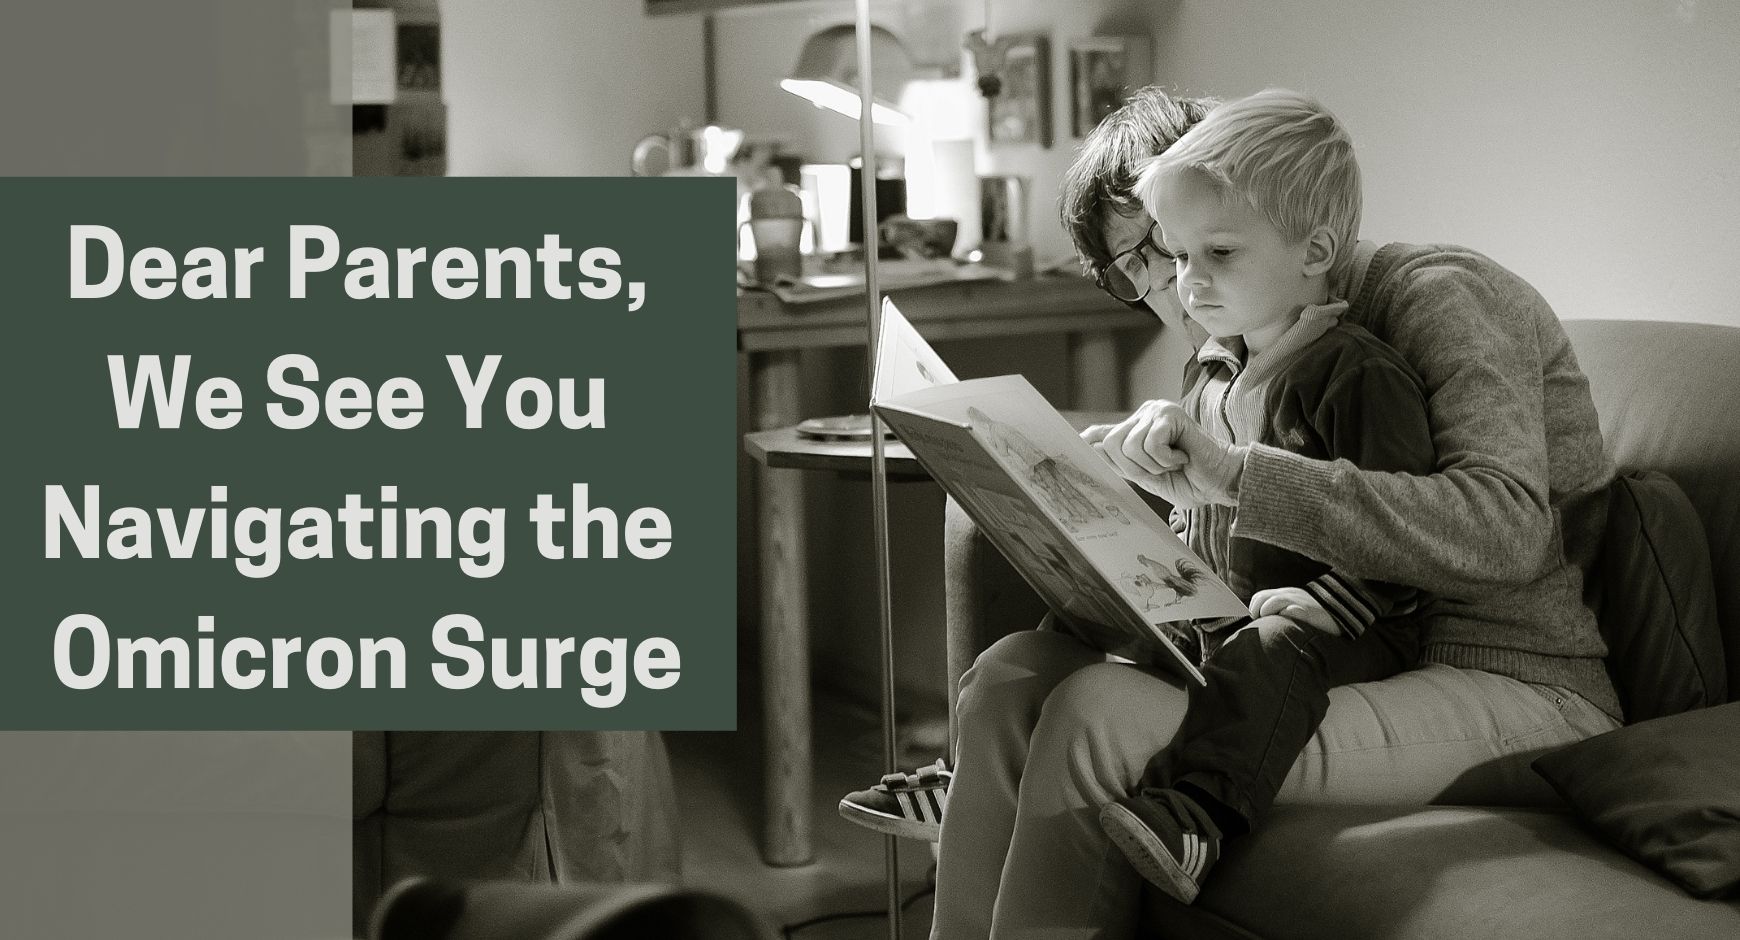 A parent with a child on their lap reading a book next to words that read "Dear Parents, We See You Navigating the Omicron Surge"